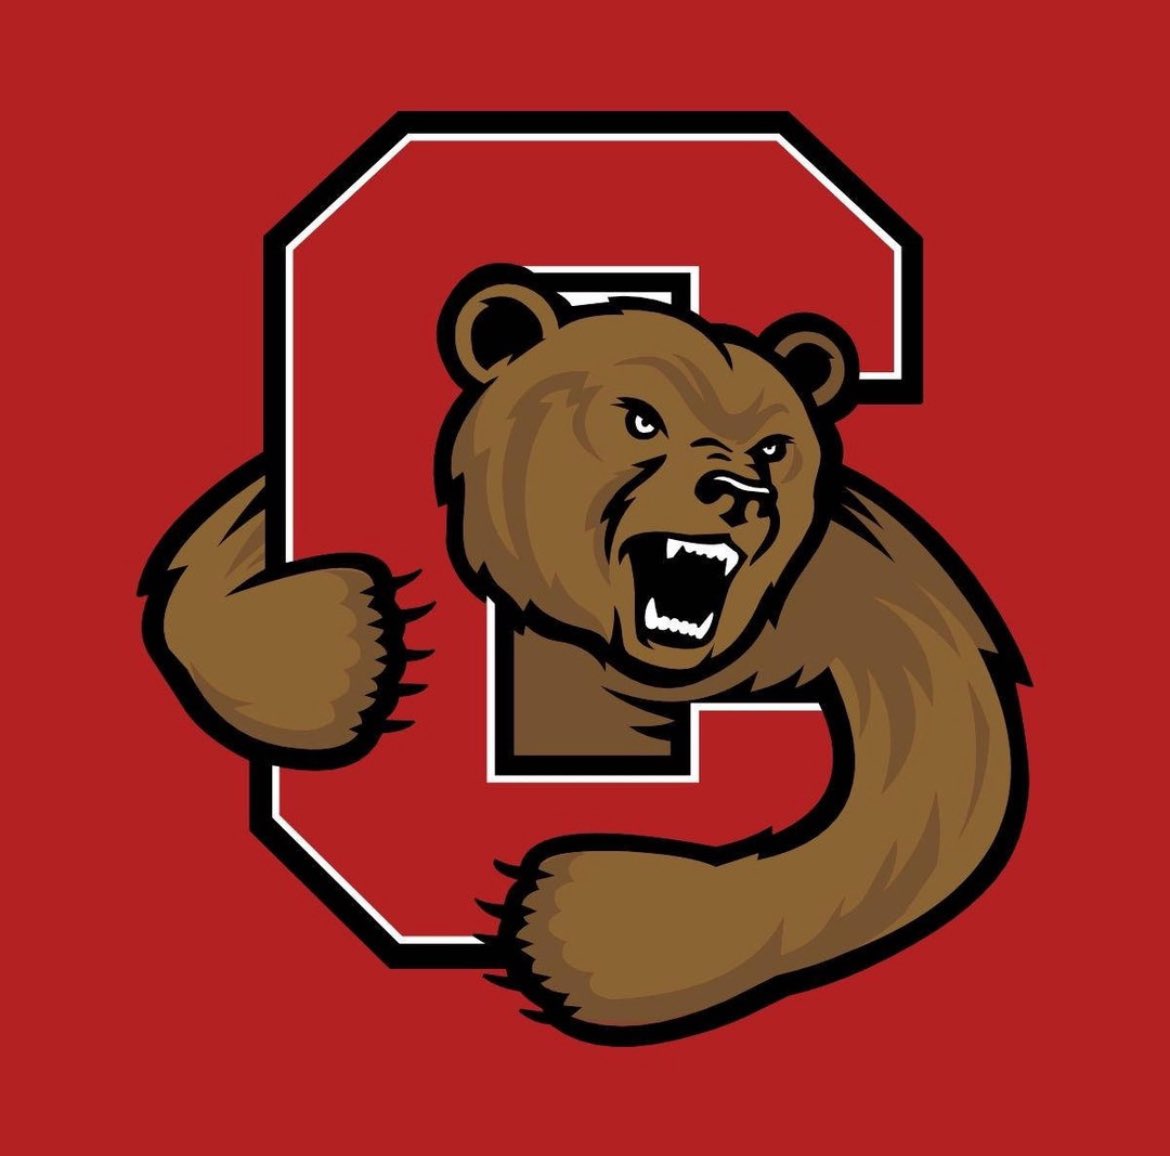 After A Great Conversation With @CoachEFranklin I’m extremely Blessed To Receive My First IVY League offer From Cornell University #GOBEARS🐻🔴 #AGTG